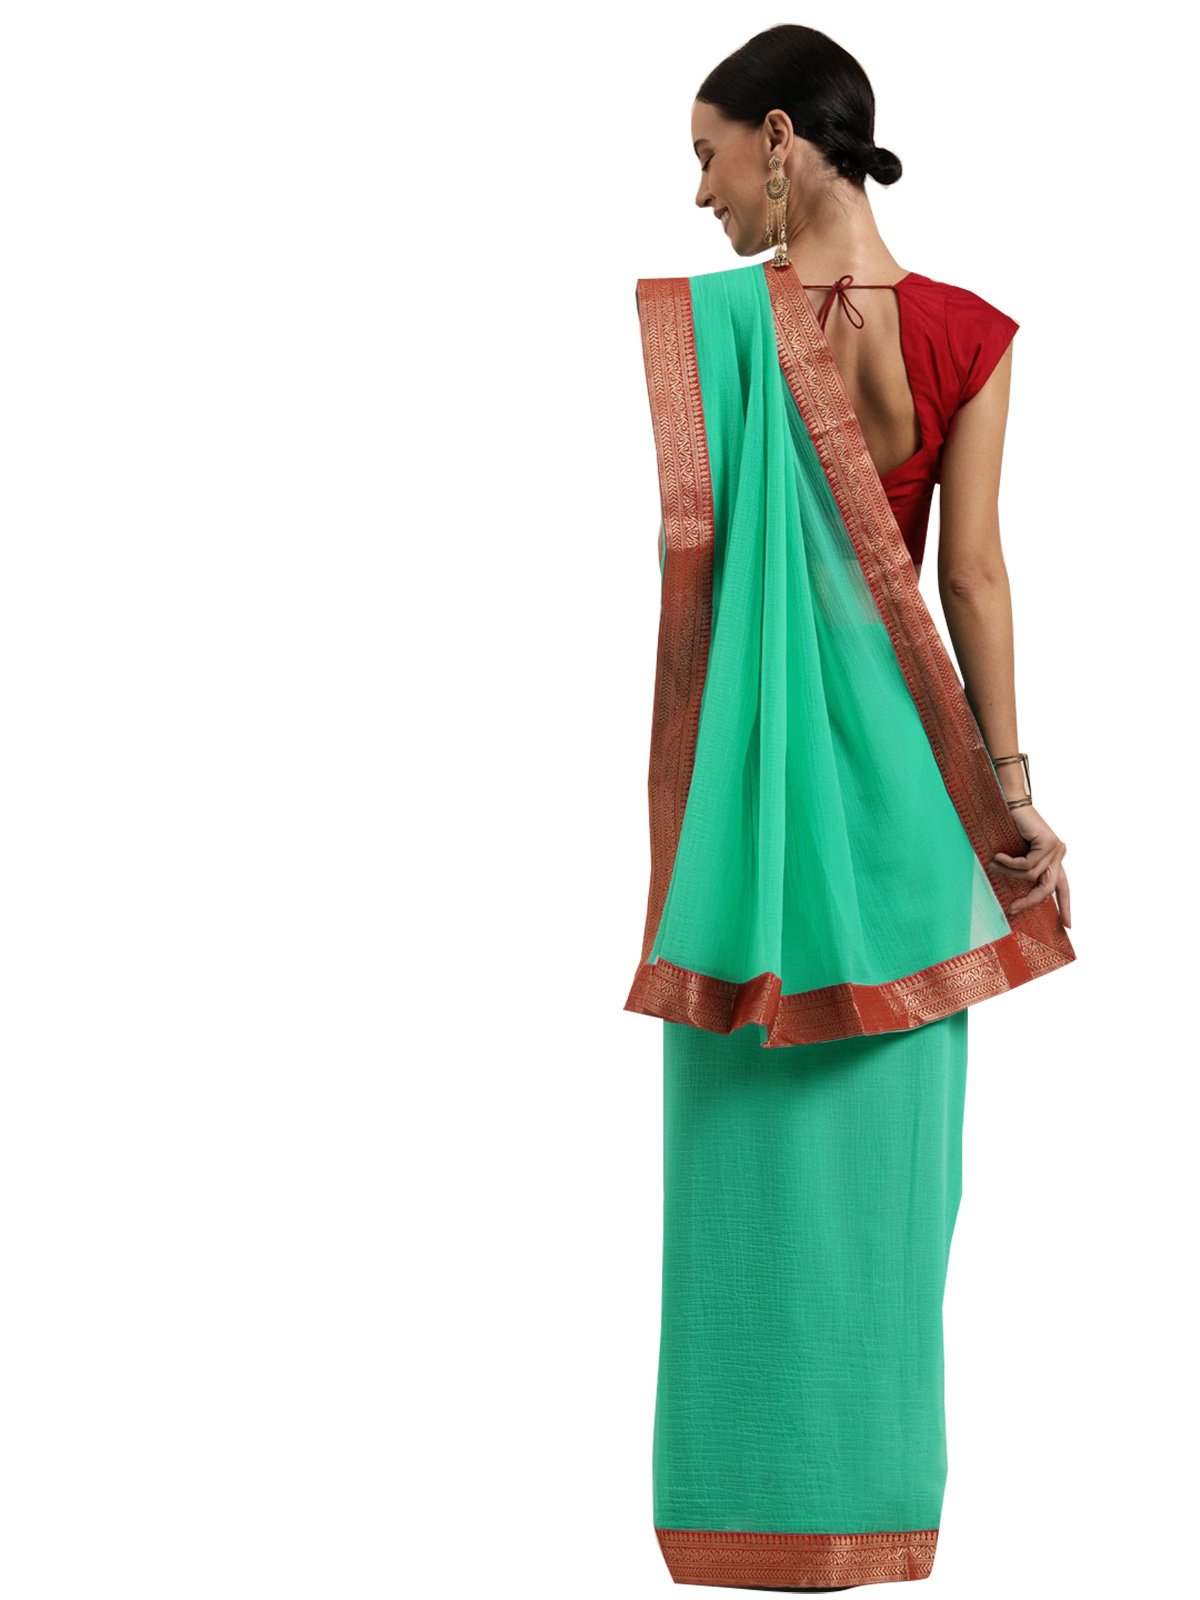 Ishin Poly Georgette Green Solid Women's Saree With Lace